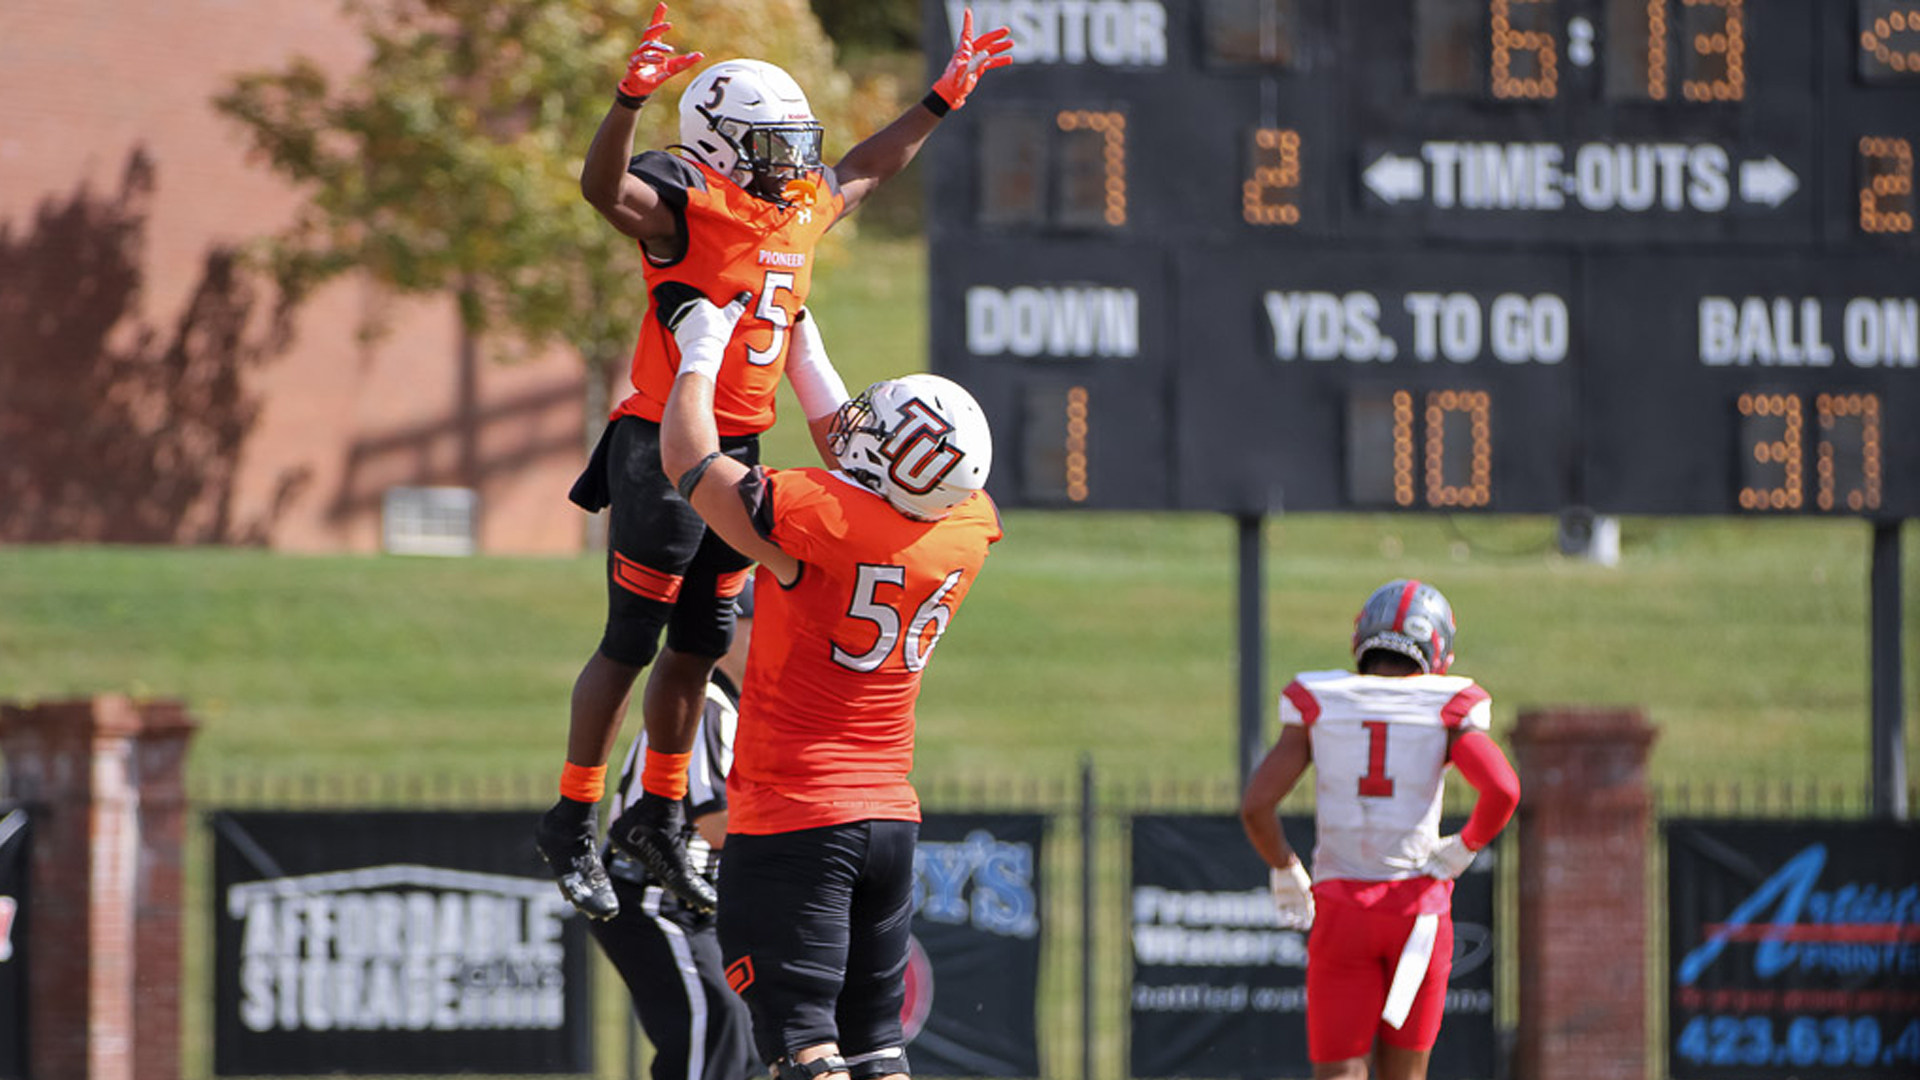 Tyler Burke (5) celebrates with Adrian Gumm (56) following a touchdown in Tusculum's 35-7 win over UVA Wise (photo by Kari Ham).